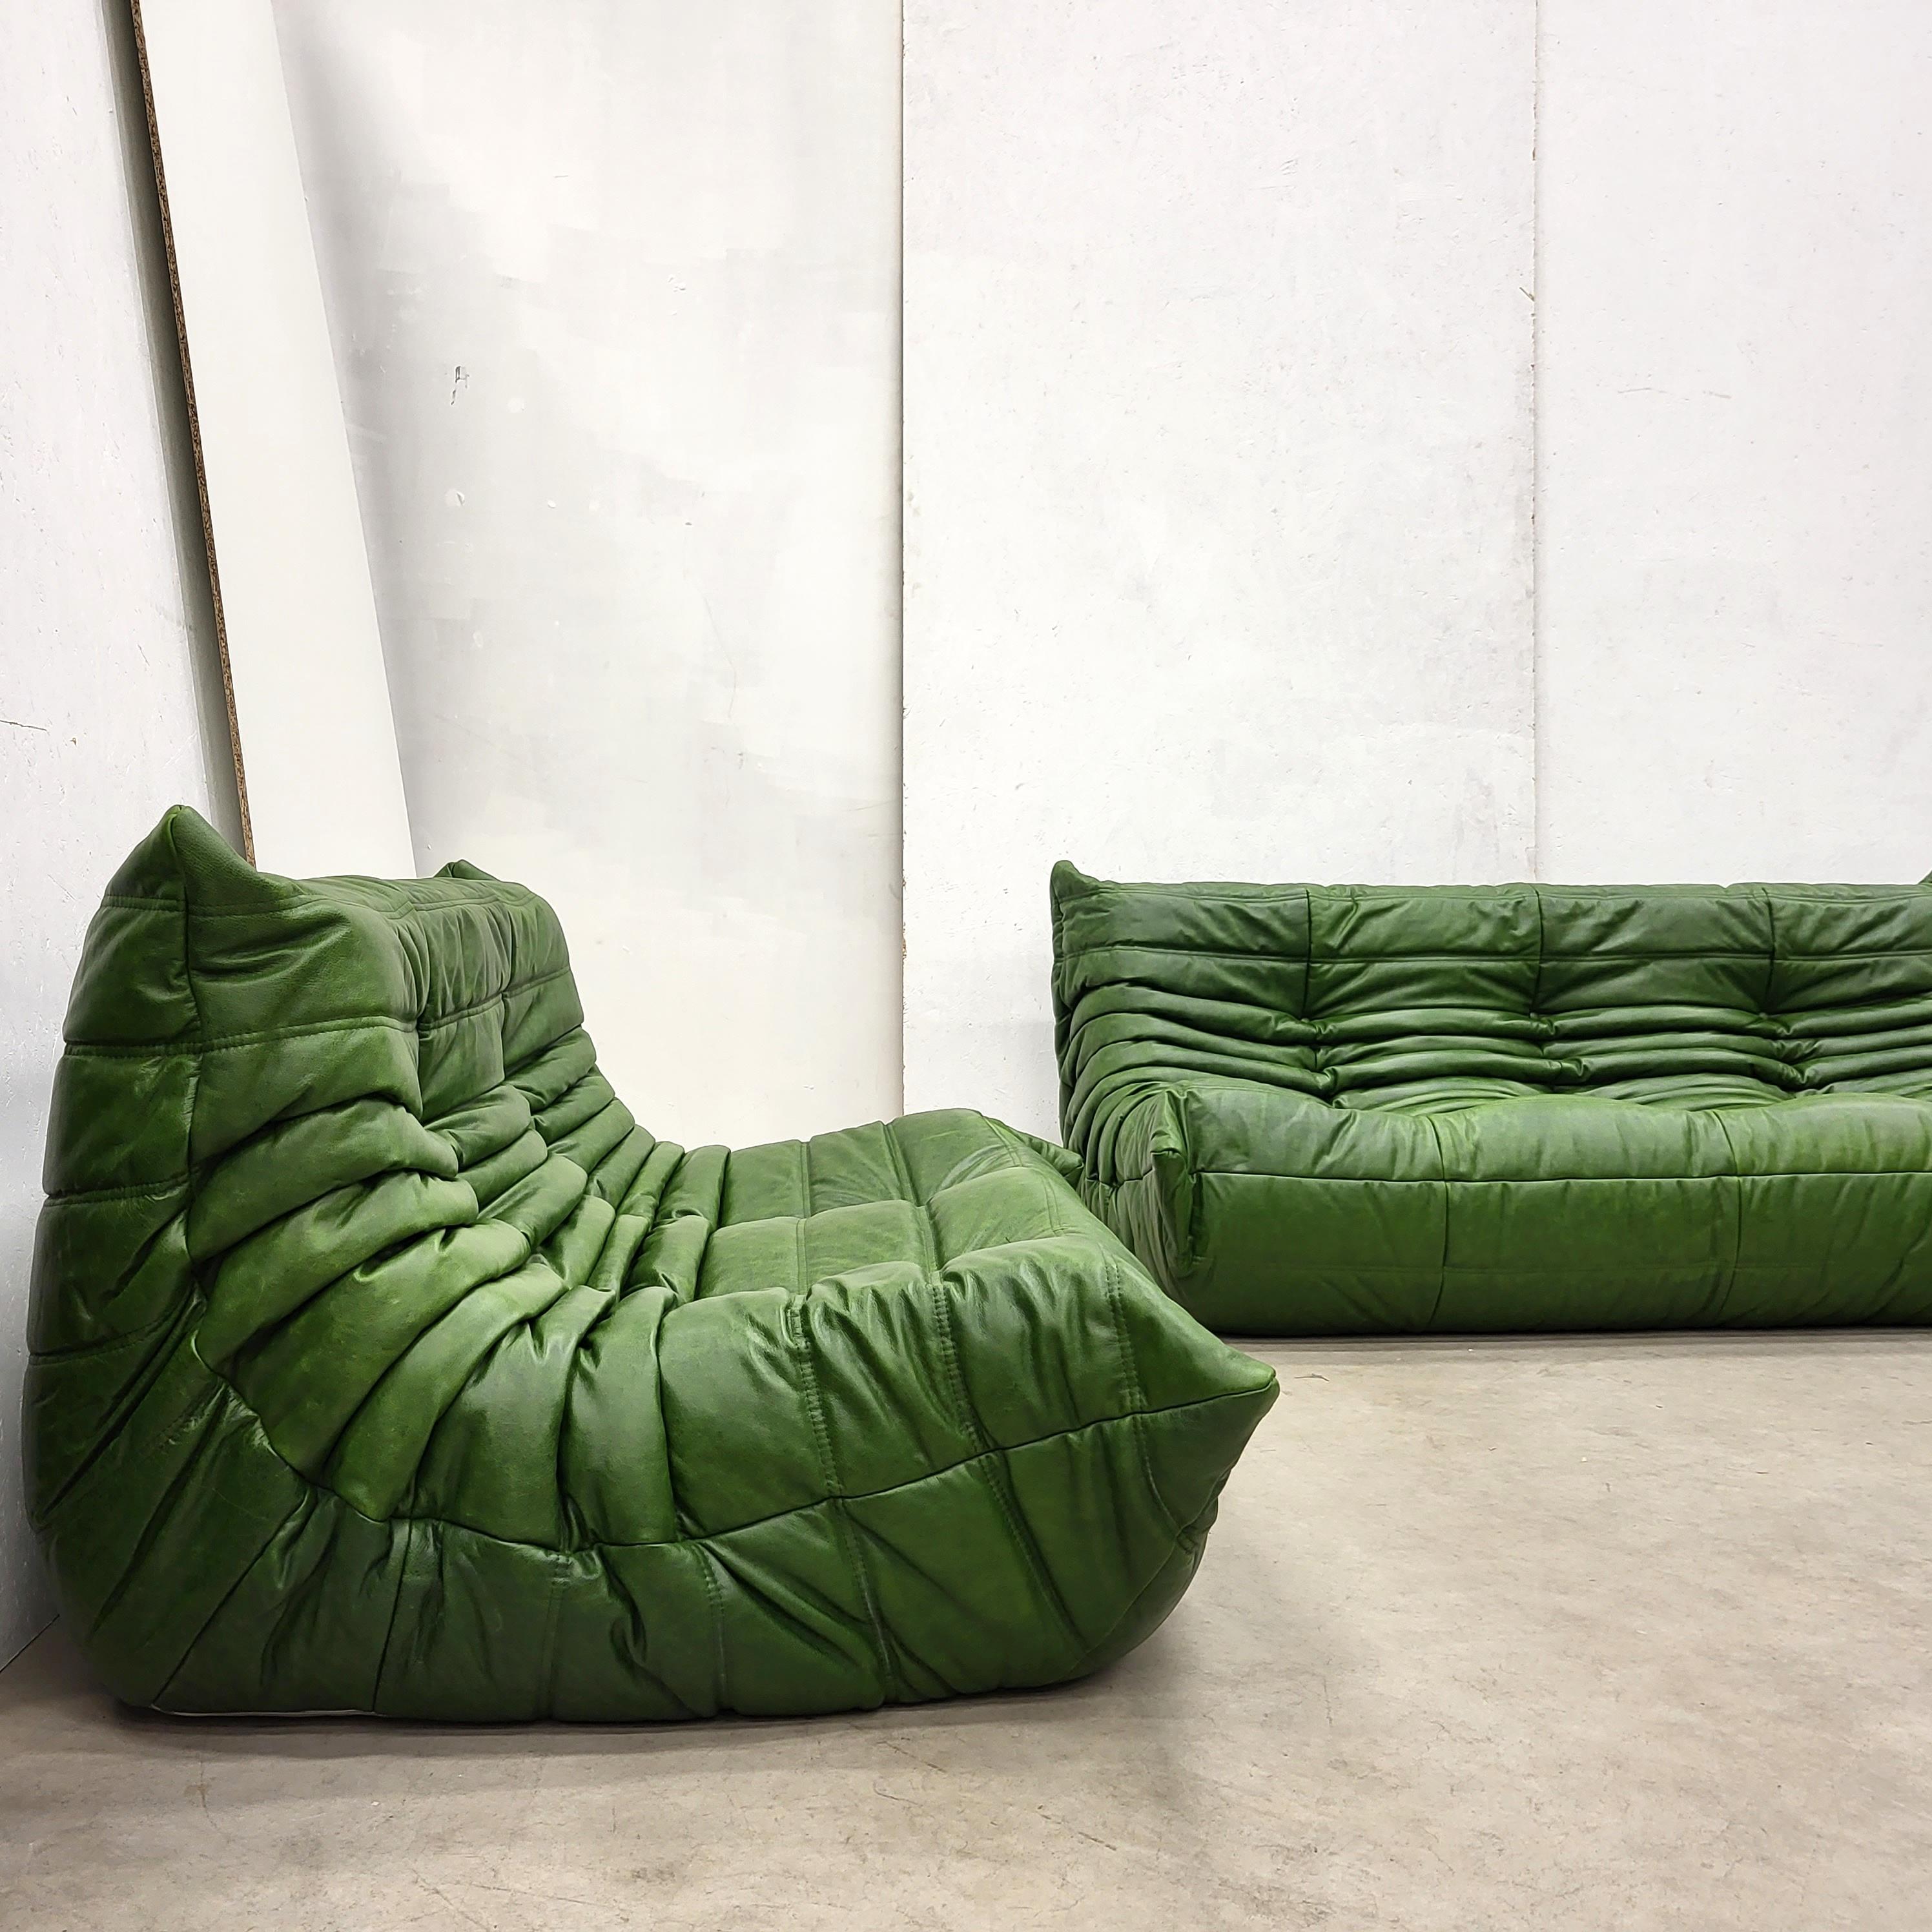 Impressive Togo seating group in Vintage green leather designed in 1973 by Michel Ducaroy for Ligne Roset in France.

The modular set includes a large sofa and 2x 2-seater sofa´s.
It can be figured into a large sofa or split into single